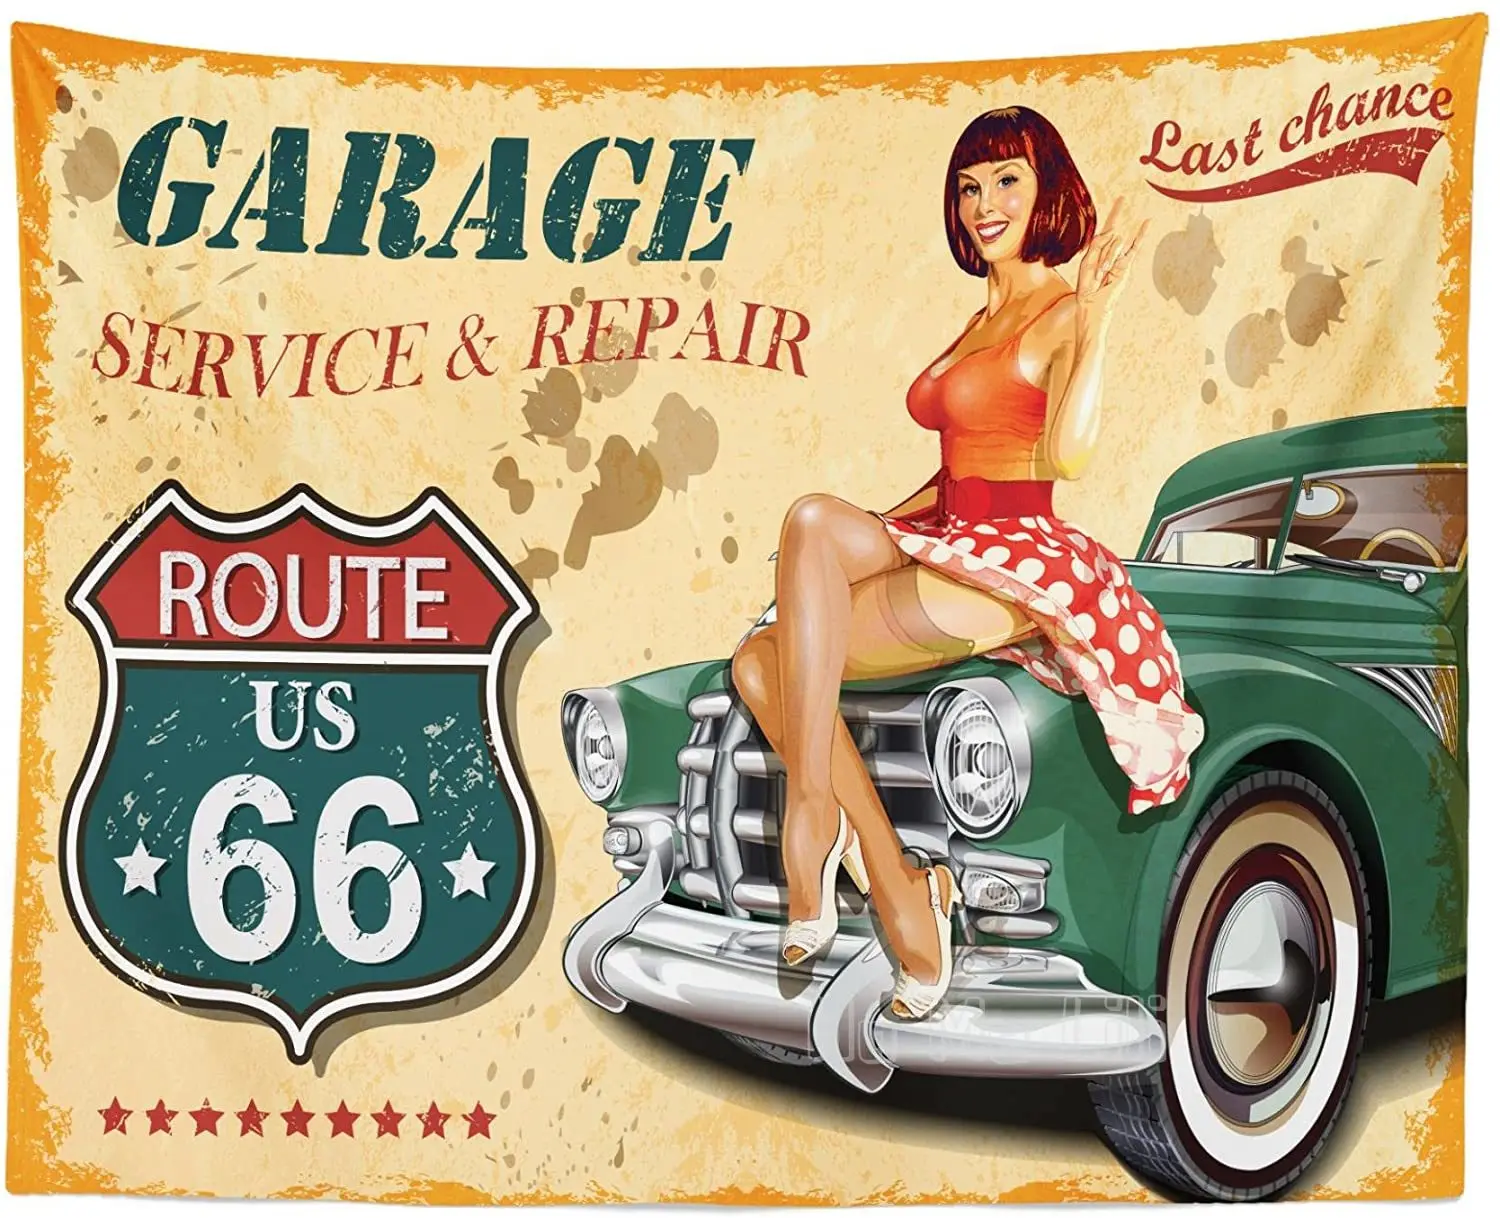 

Route 66 vintage Style Garage Poster With A Woman On Retro Car Service Print Fabric Wall Hanging Decor Peach Green